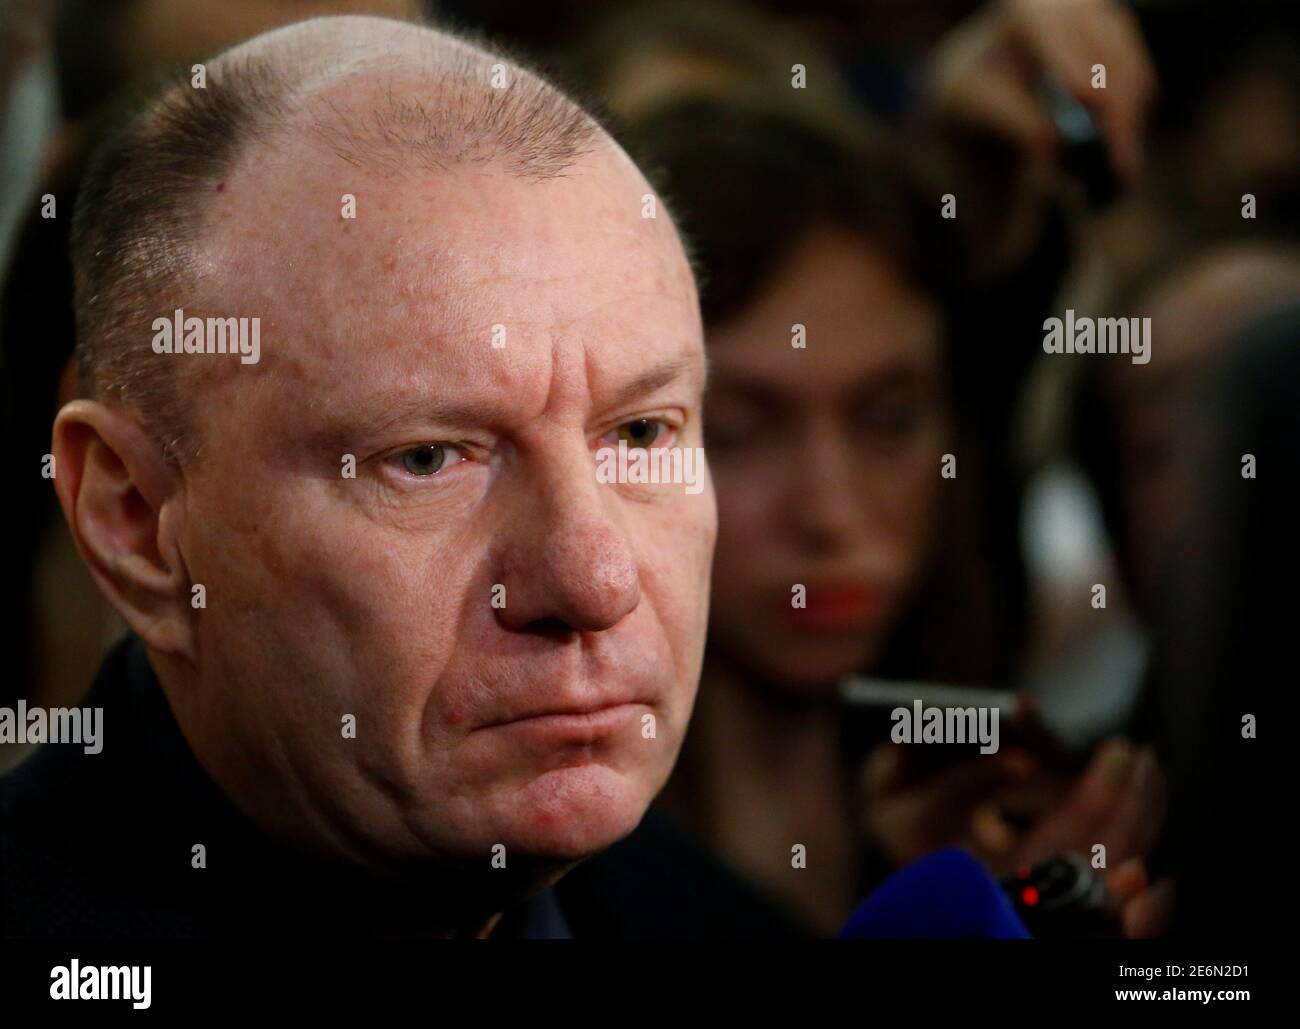 Vladimir Potanin, Chief Executive of Russia's Norilsk Nickel, speaks to journalists on the sidelines of the Week of Russian Business, organized by the Russian Union of Industrialists and Entrepreneurs (RSPP), in Moscow, Russia March 16, 2017. REUTERS/Sergei Karpukhin Stock Photo